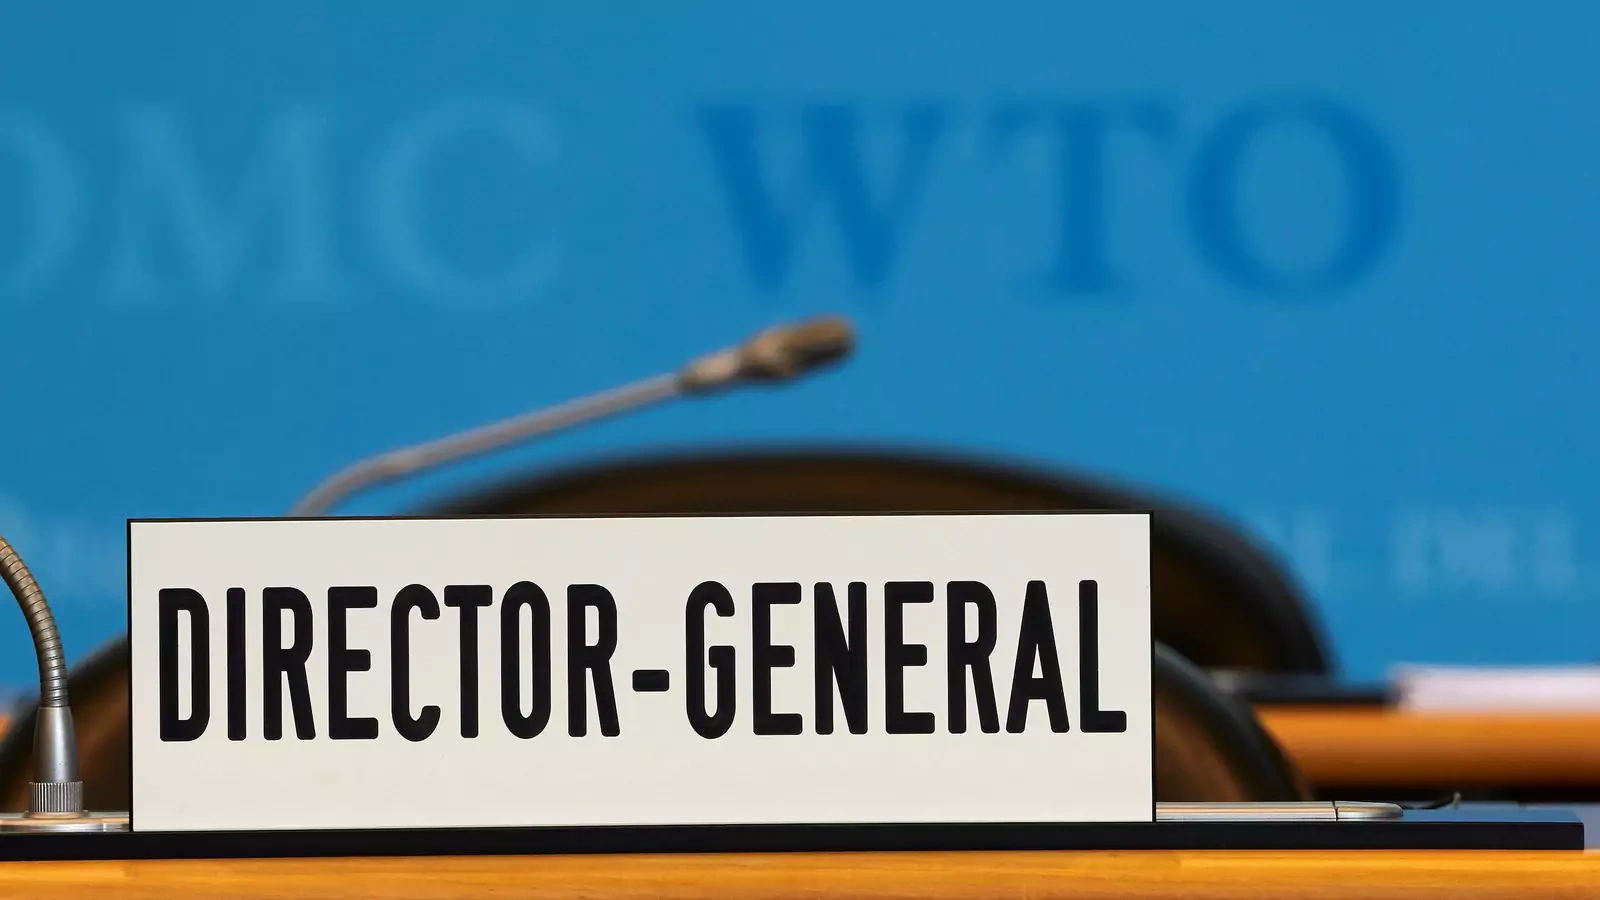 The Director General’s chair at WTO headquarters in Geneva, Switzerland.